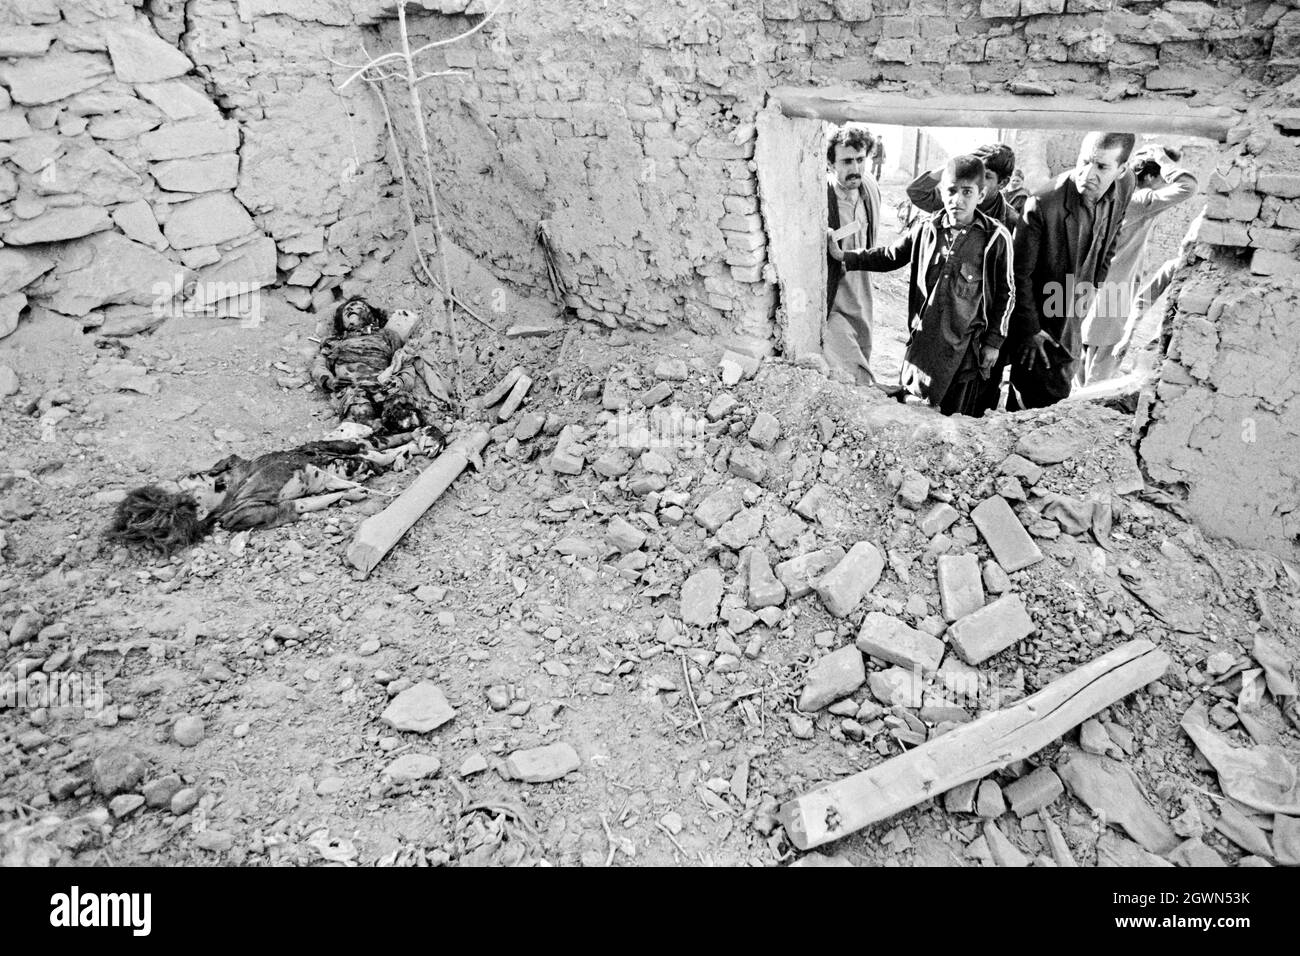 KABUL, AFGHANISTAN. 16th April 1988. Neighbors look in horror at the carnage following a rocket attack that killed two young girls playing in a courtyard in the residential neighborhood of Karte-Ye-Sakhi April 16, 1988 in Kabul, Afghanistan. The rocket, fired by the Afghan mujahideen hit the home killing the young girls instantly. Stock Photo